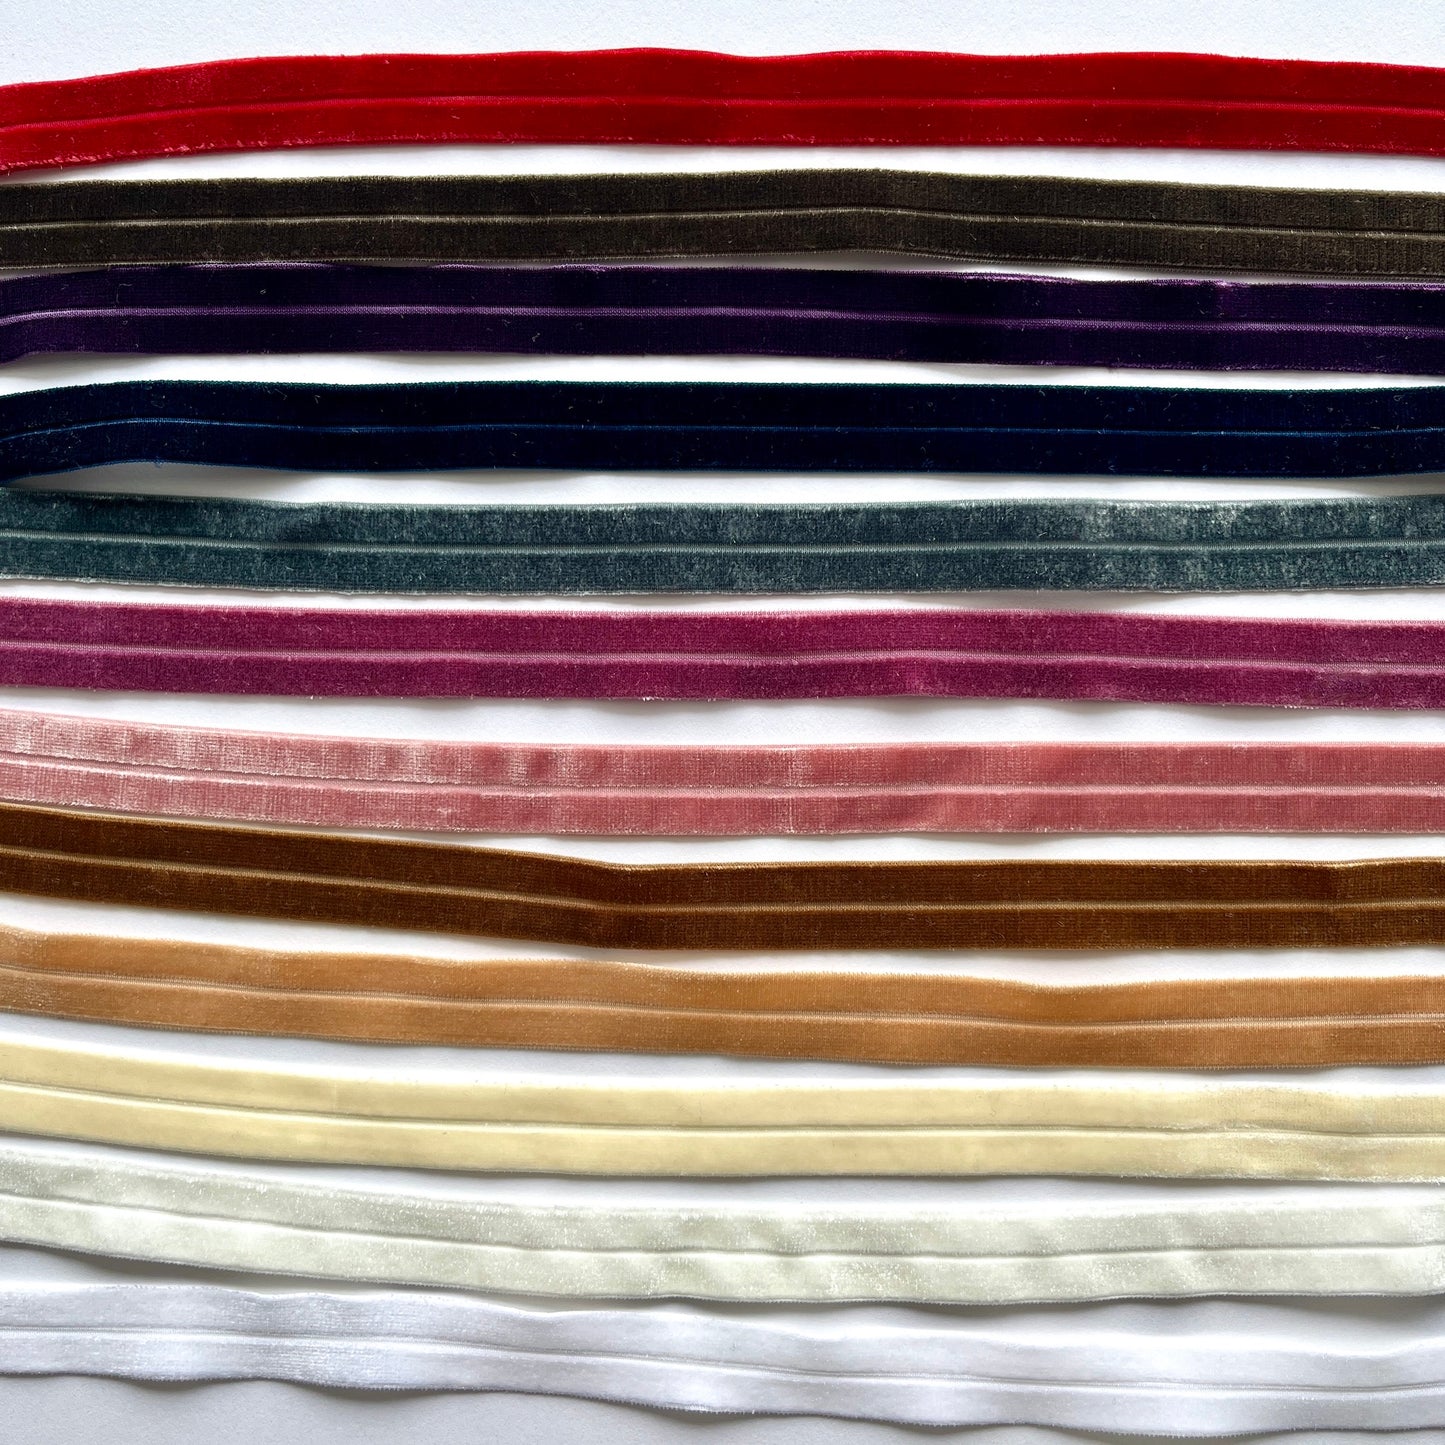 Stretch Velvet fold over elastic (FOE).  16mm wide with a centre fold. Use as a binding for stretch fabrics, for straps, lingerie and underwear making, headbands, hair ties, dancewear and active wear projects.